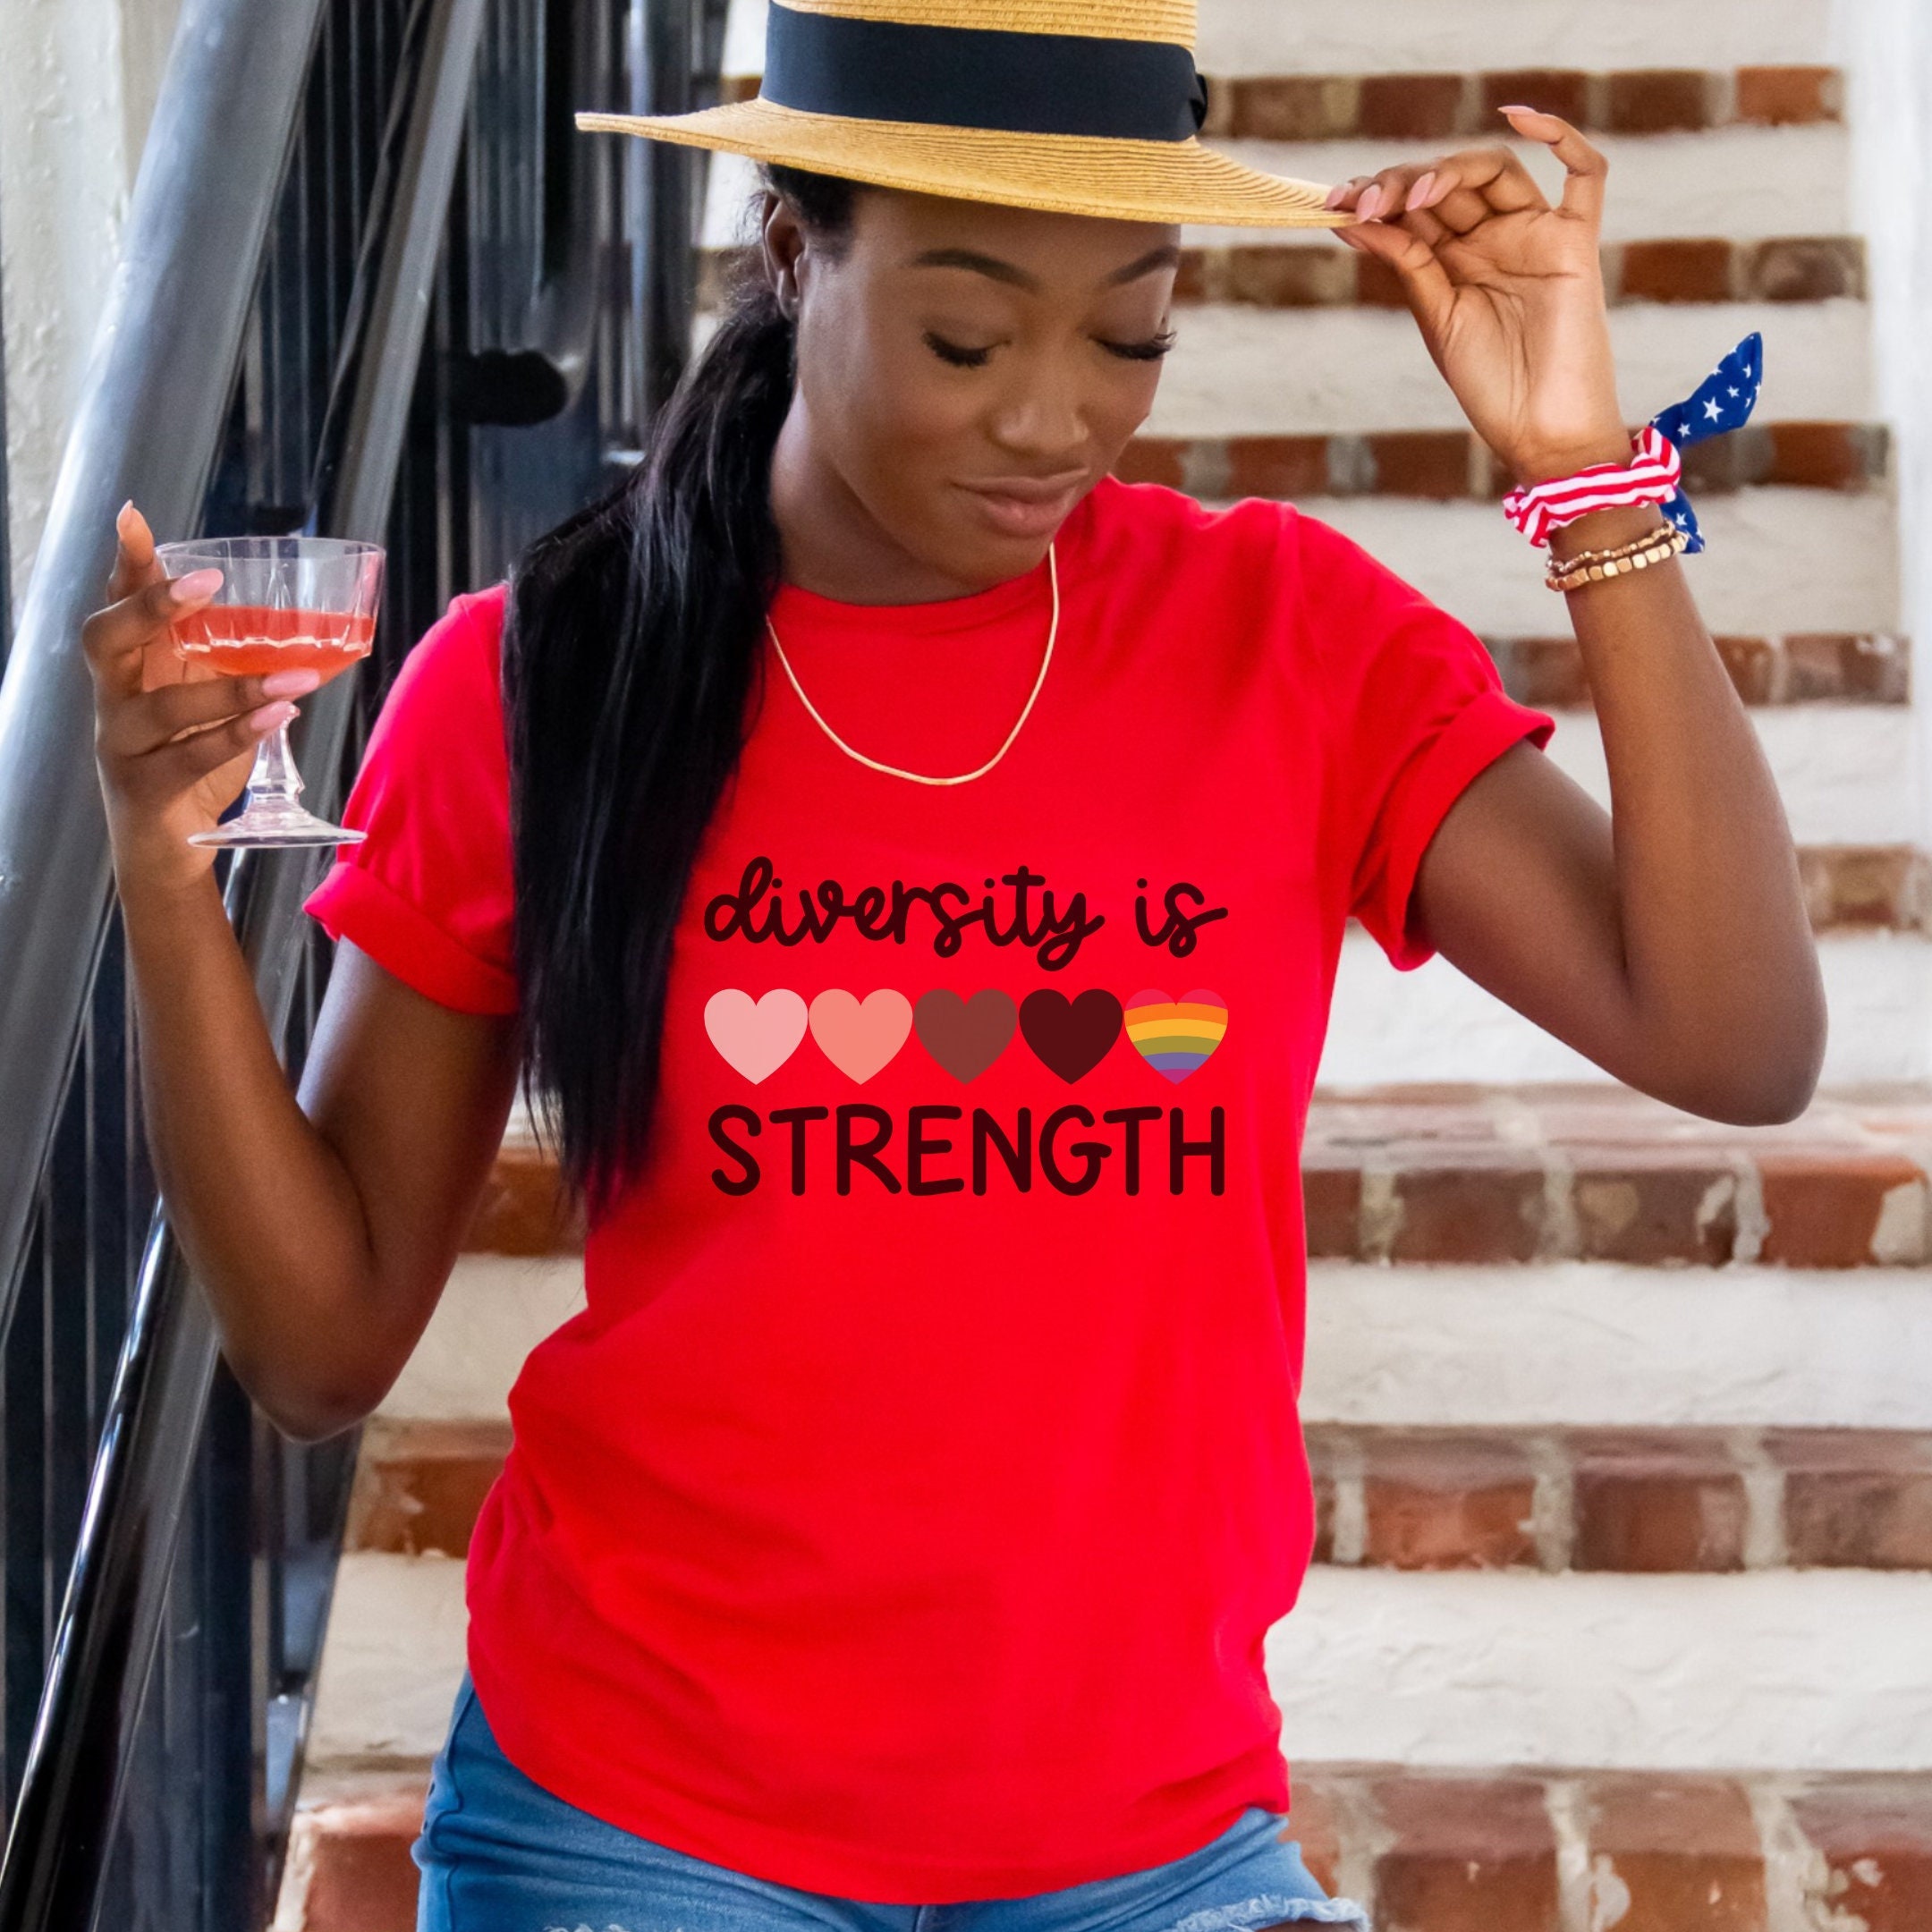 Diversity is Strength T-shirt - red or white options, available in